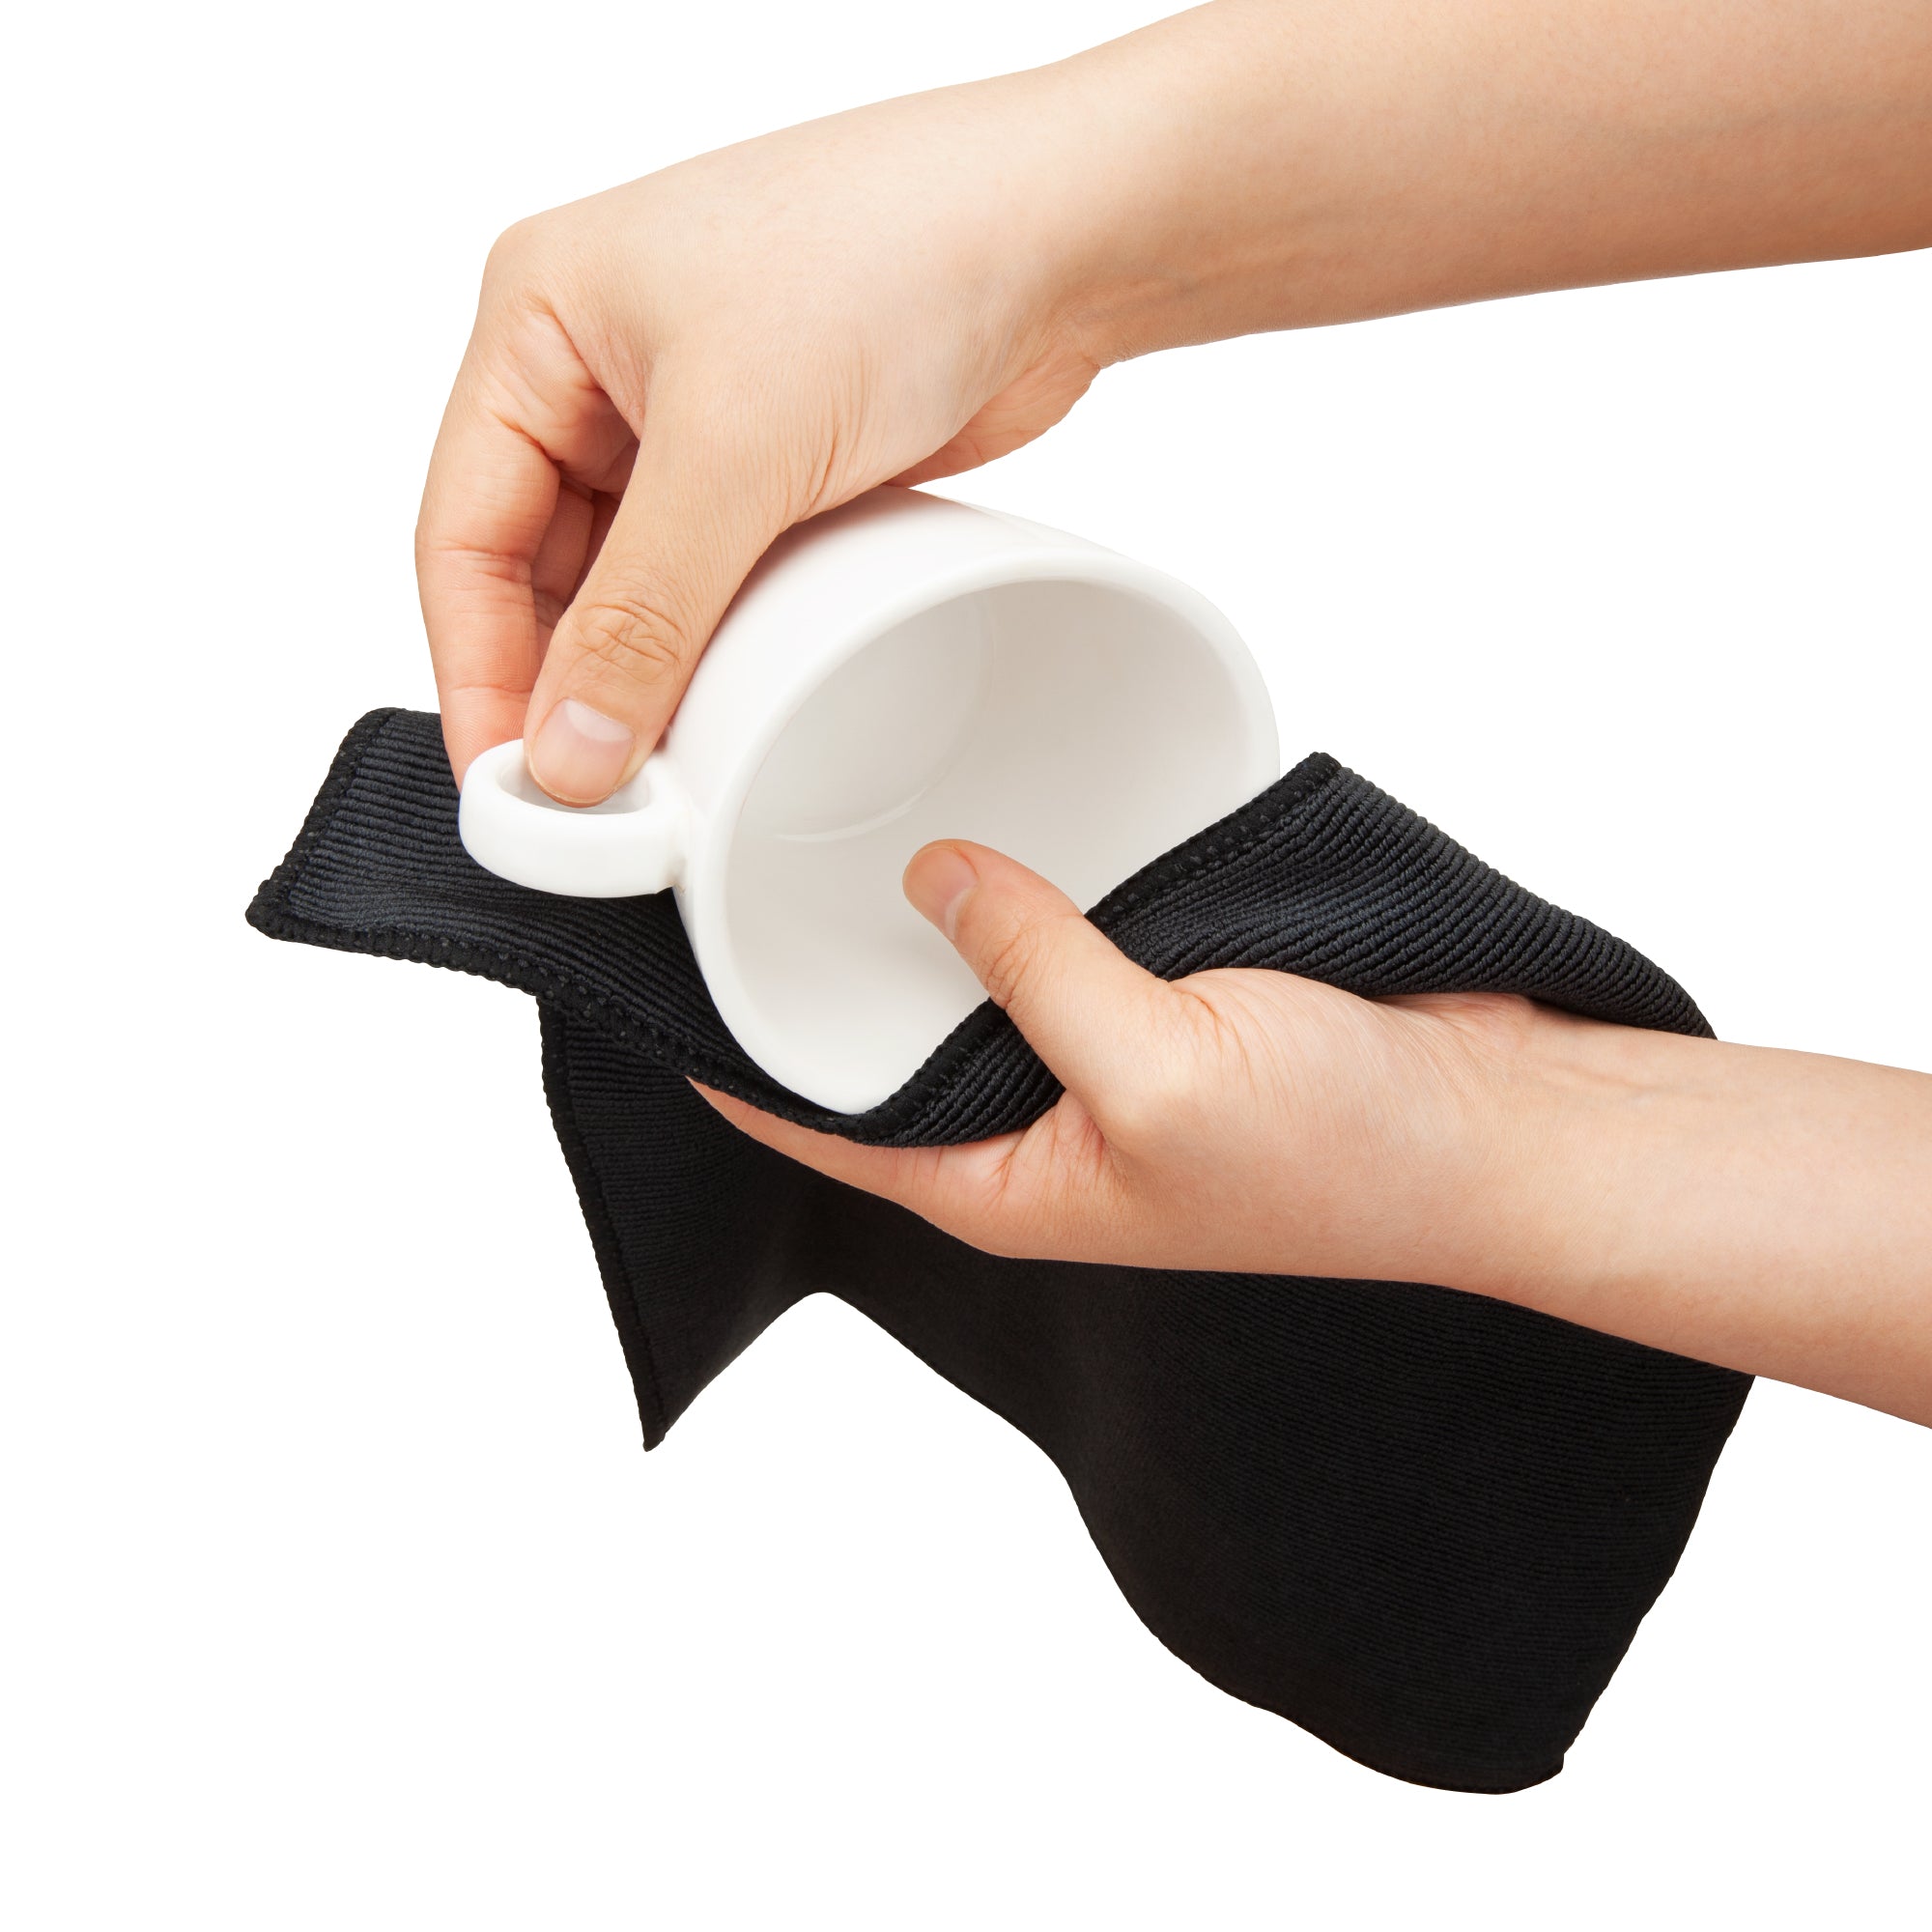  Espresso Barista Cleaning Towel Set for Steamer - Pack